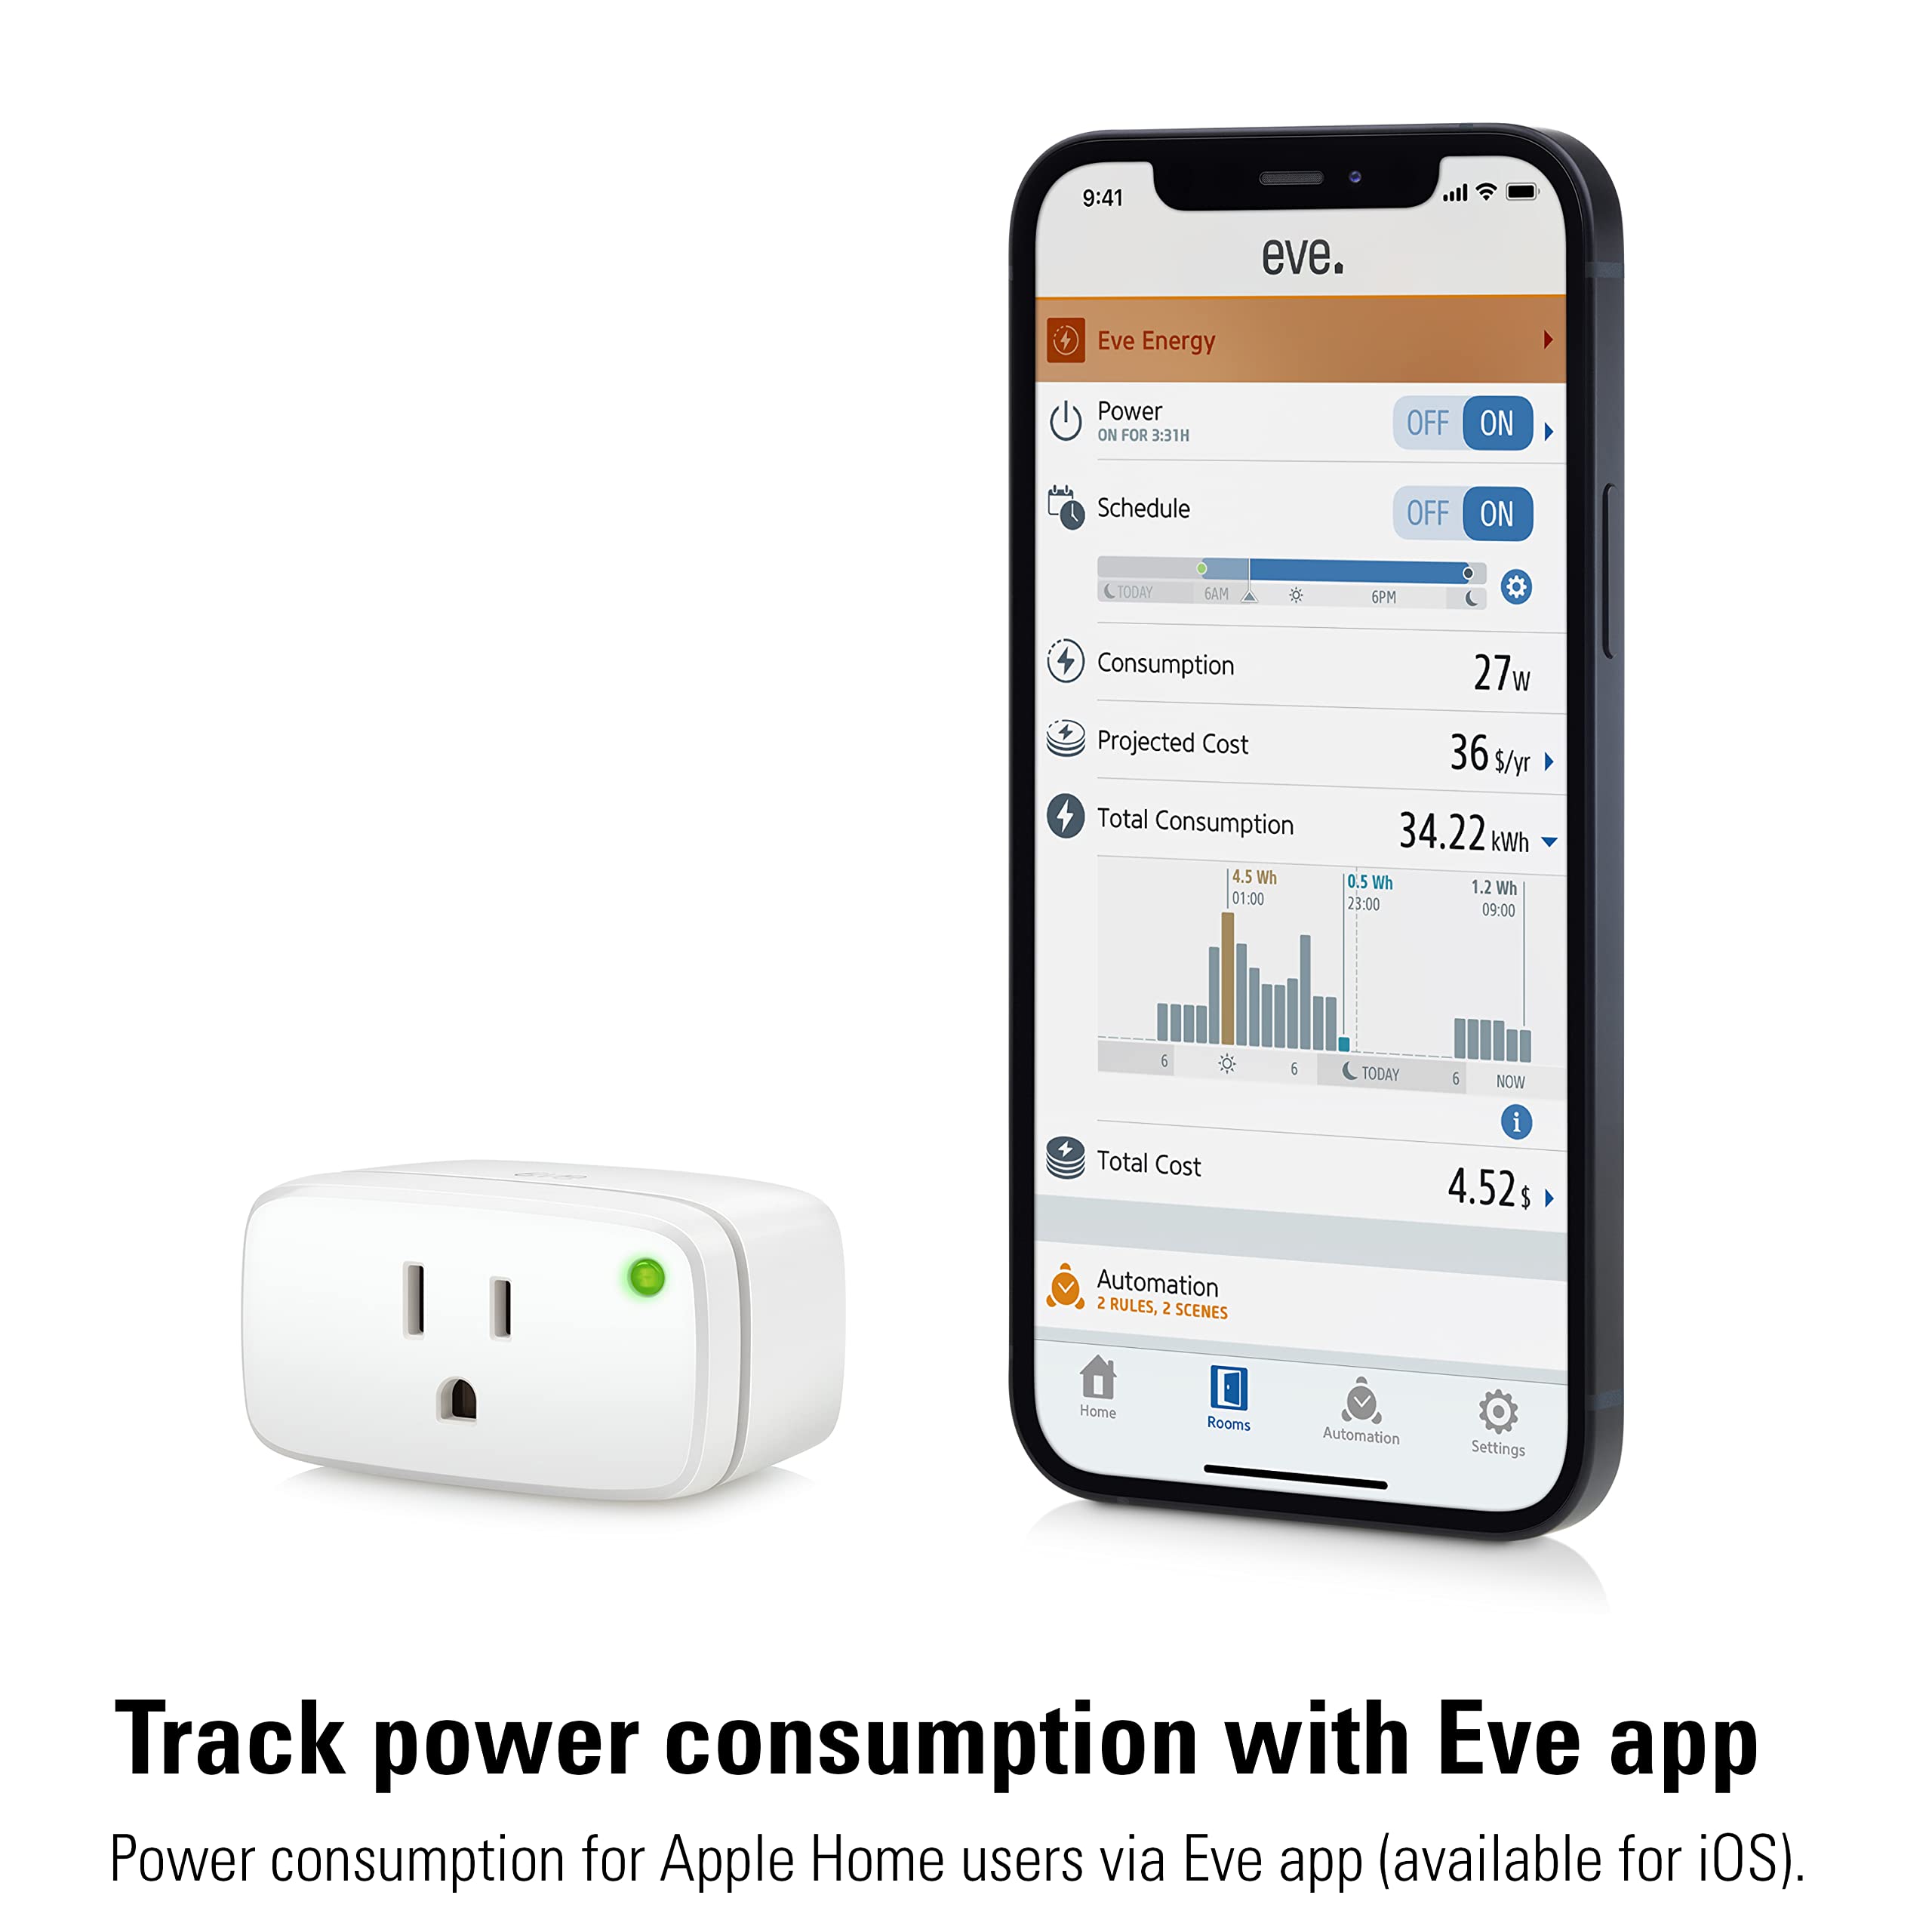 Eve Energy (Matter) 2 Pack - Smart Plug, App and Voice Control, 100% Privacy, Matter Over Thread, Works with Apple Home, Alexa, Google Home, SmartThings